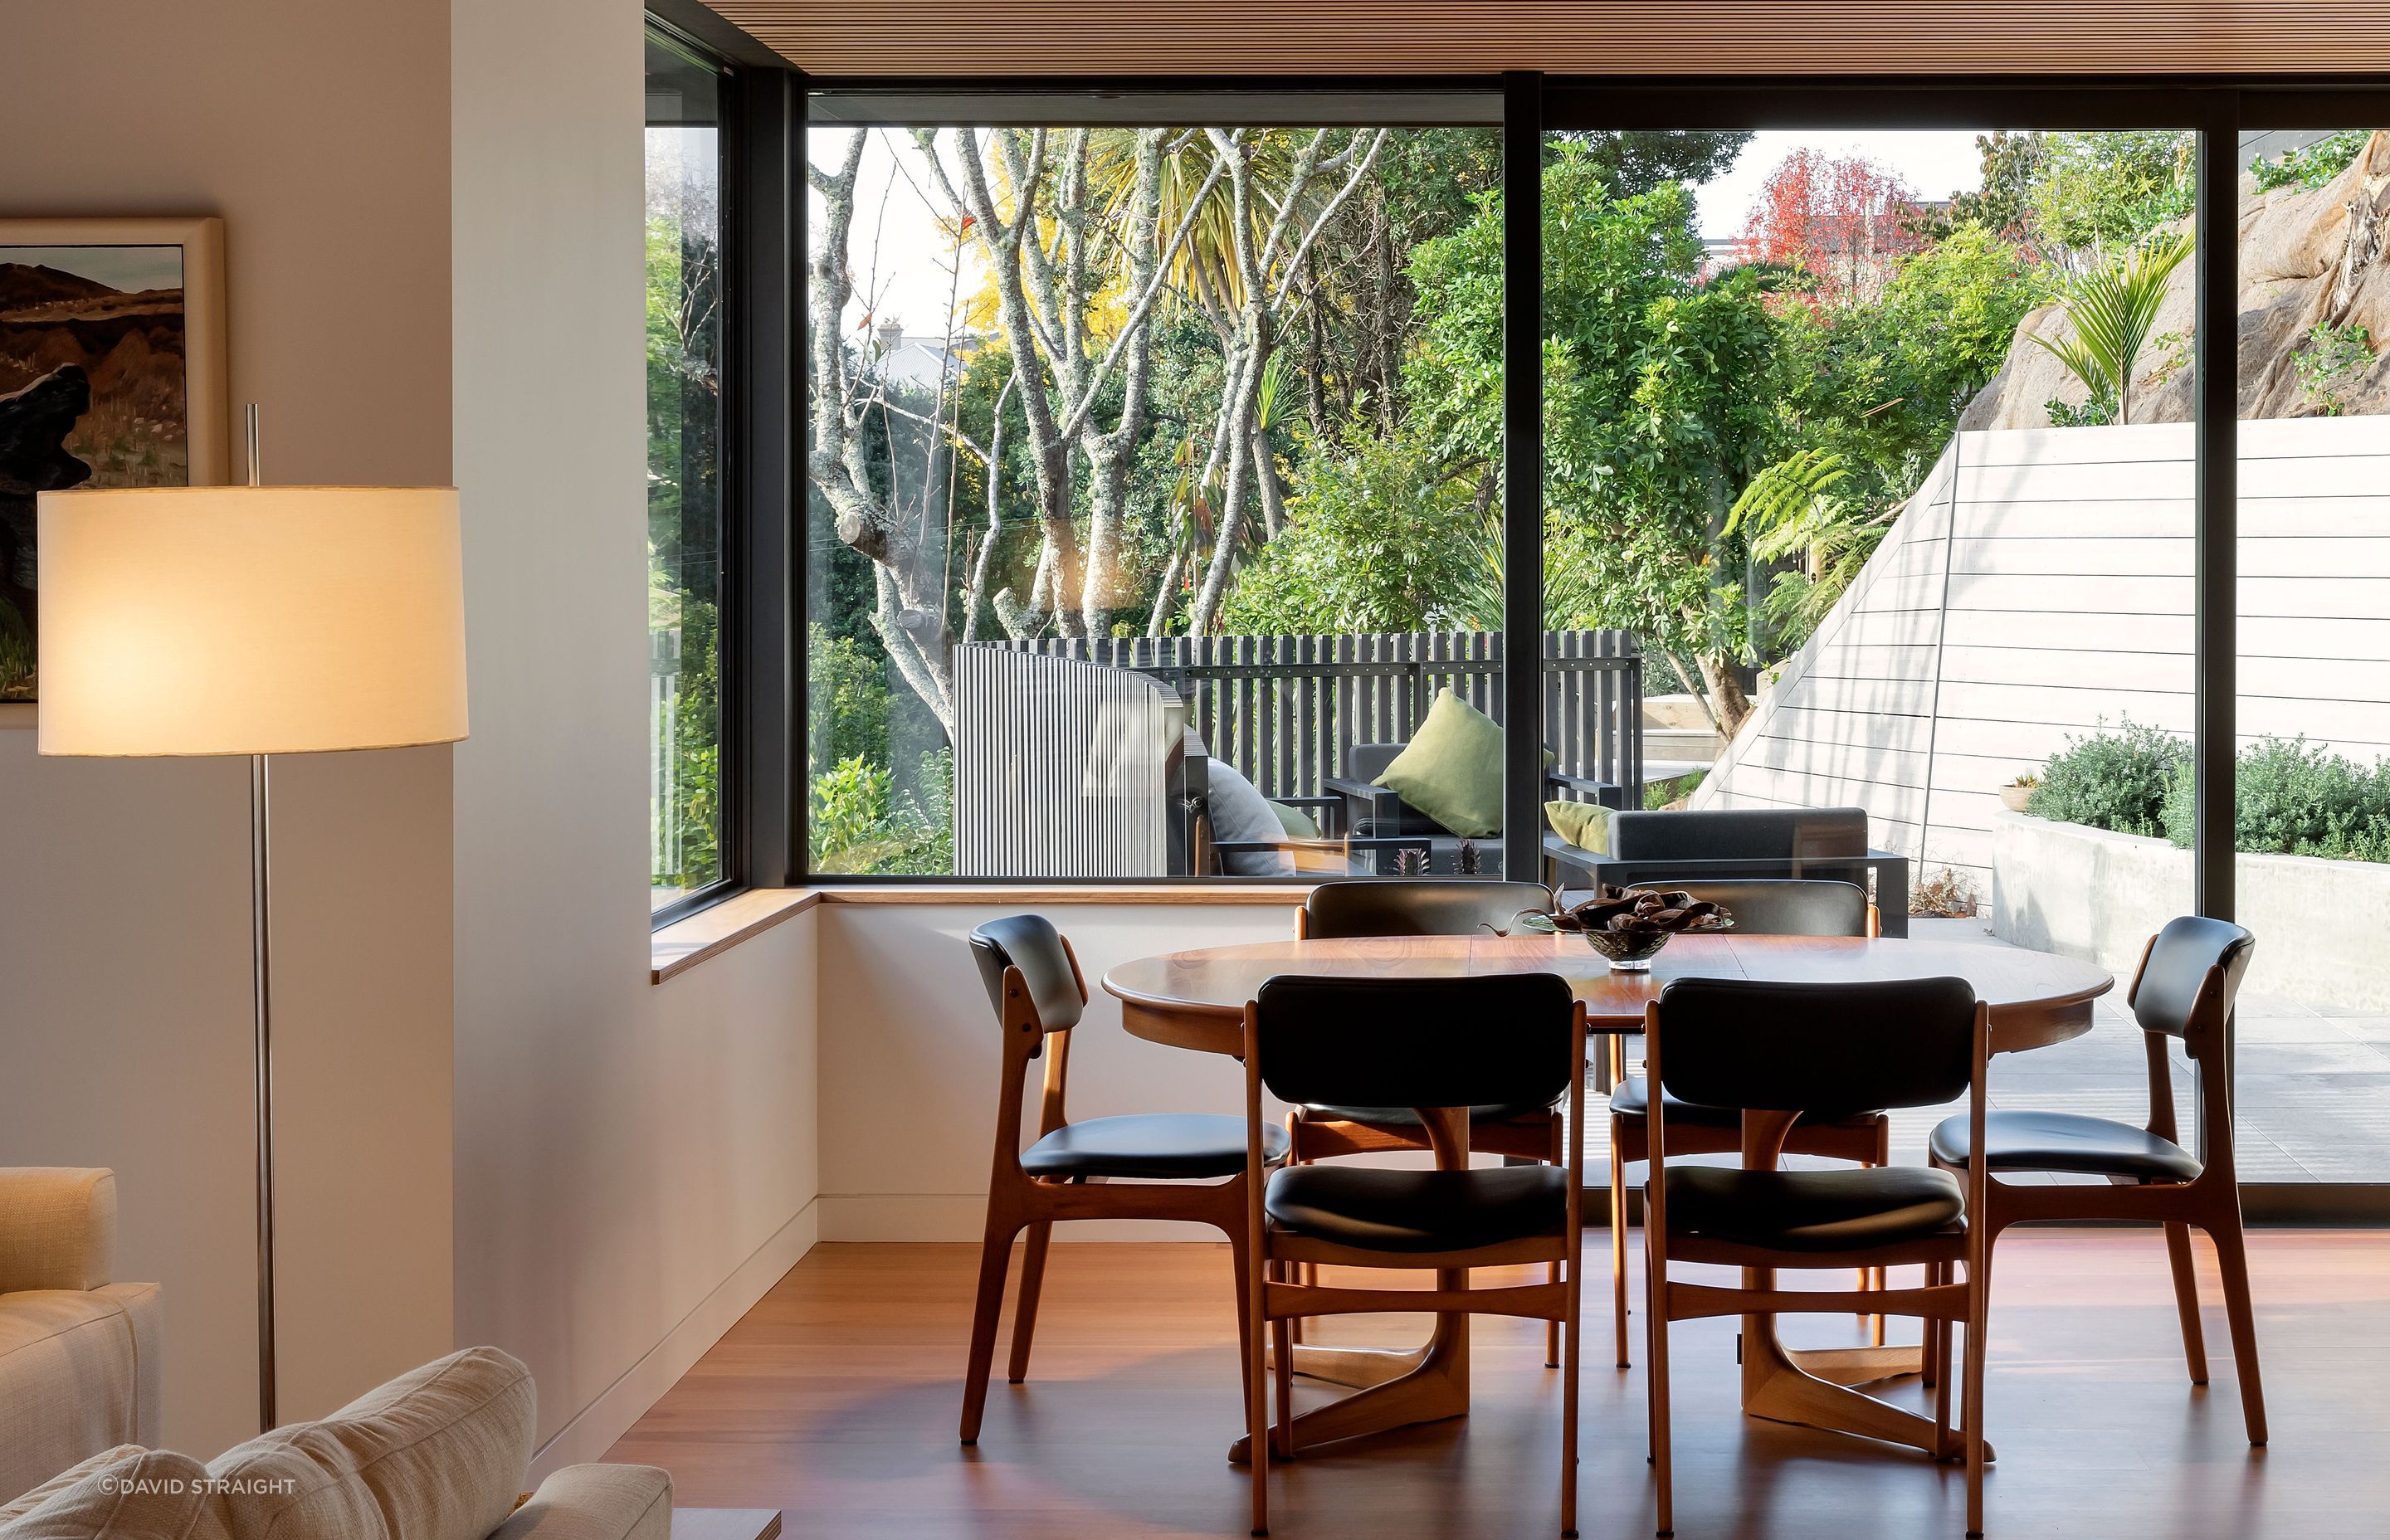 The dining area opens to the morning terrace. Hamish took care to proportion the main living space so it didn’t feel uncomfortably large. “We were wanting to define the various areas really well, and create connections with view lines to the outside.”